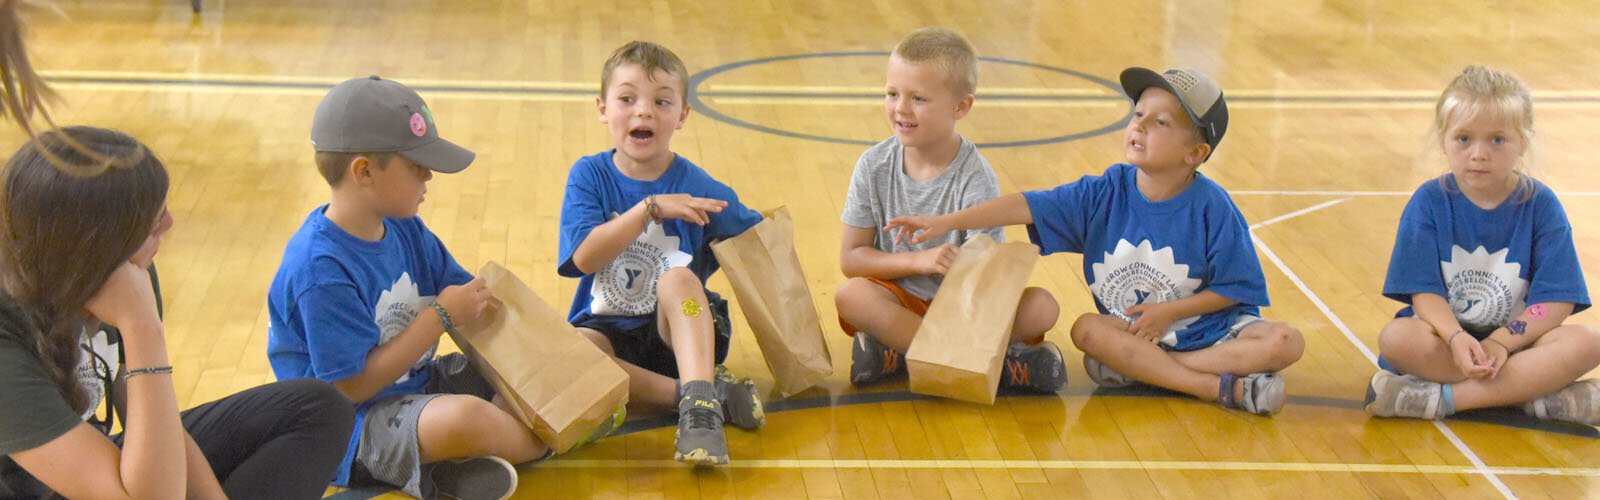 Campers at the YMCA summer day camp at Petoskey's Ottawa Elementary School play a game, hosted by Health Department of Northwest Michigan staff, in which they try to guess what fruit or vegetable is in a bag without looking.